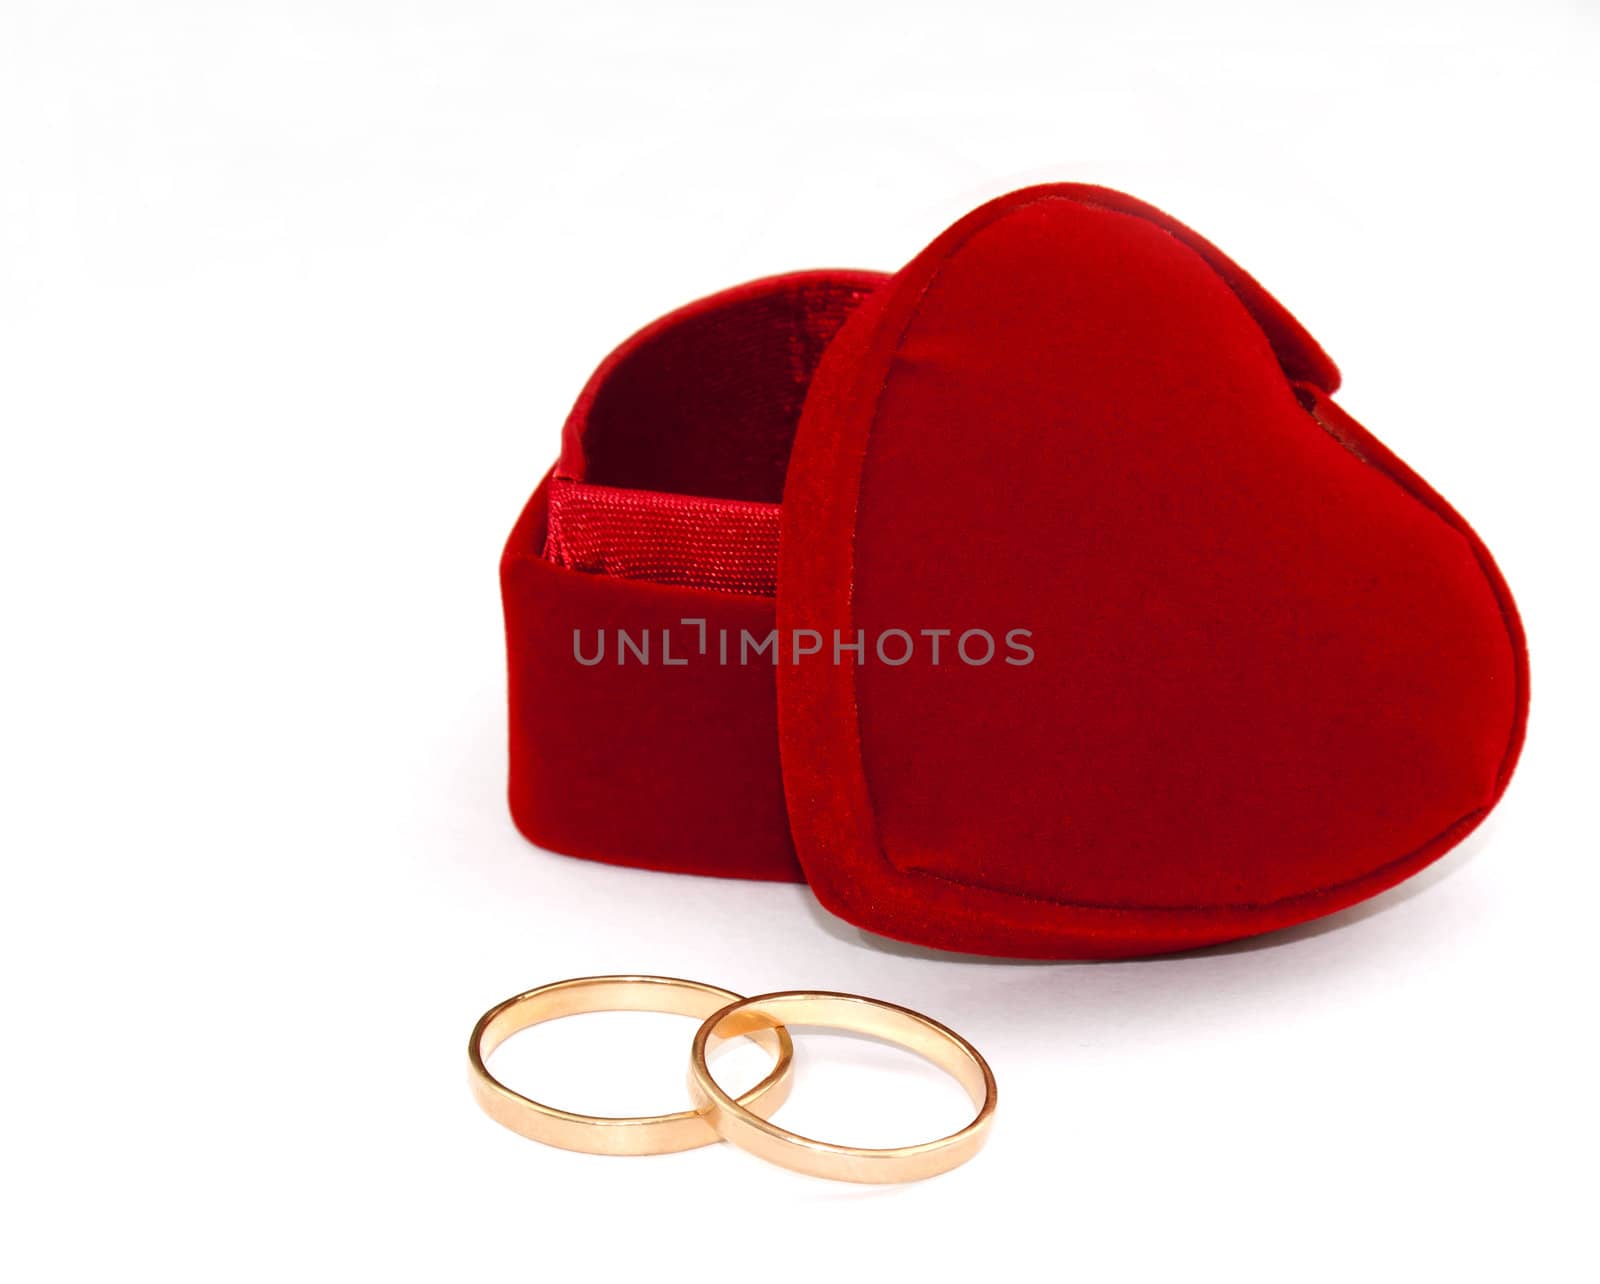 Two rings and heart shaped red box by AndreyKr